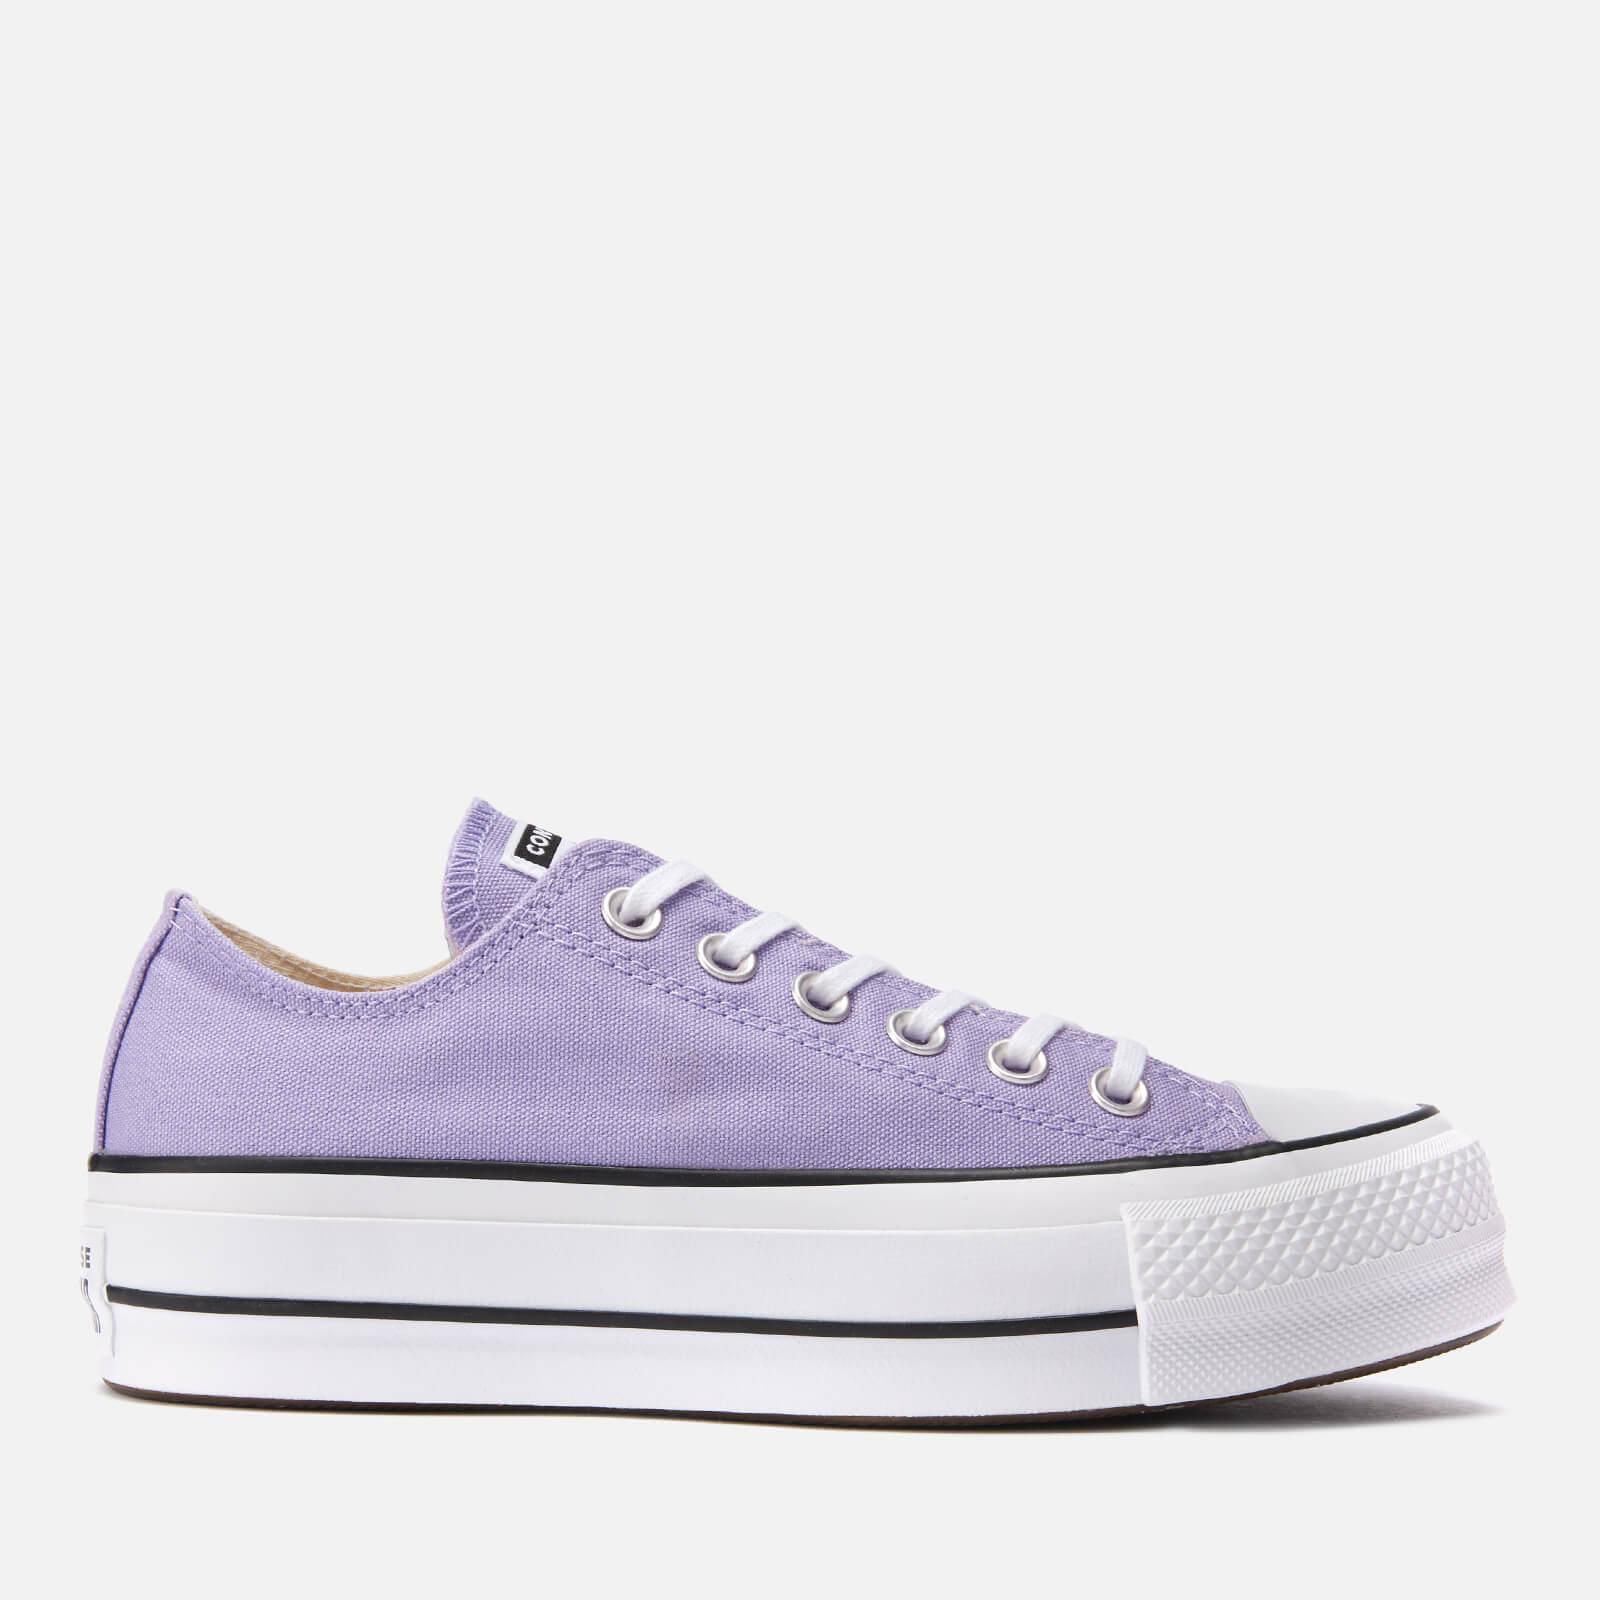 Converse Chuck Taylor All Star Lift Ox Trainers in Purple | Lyst